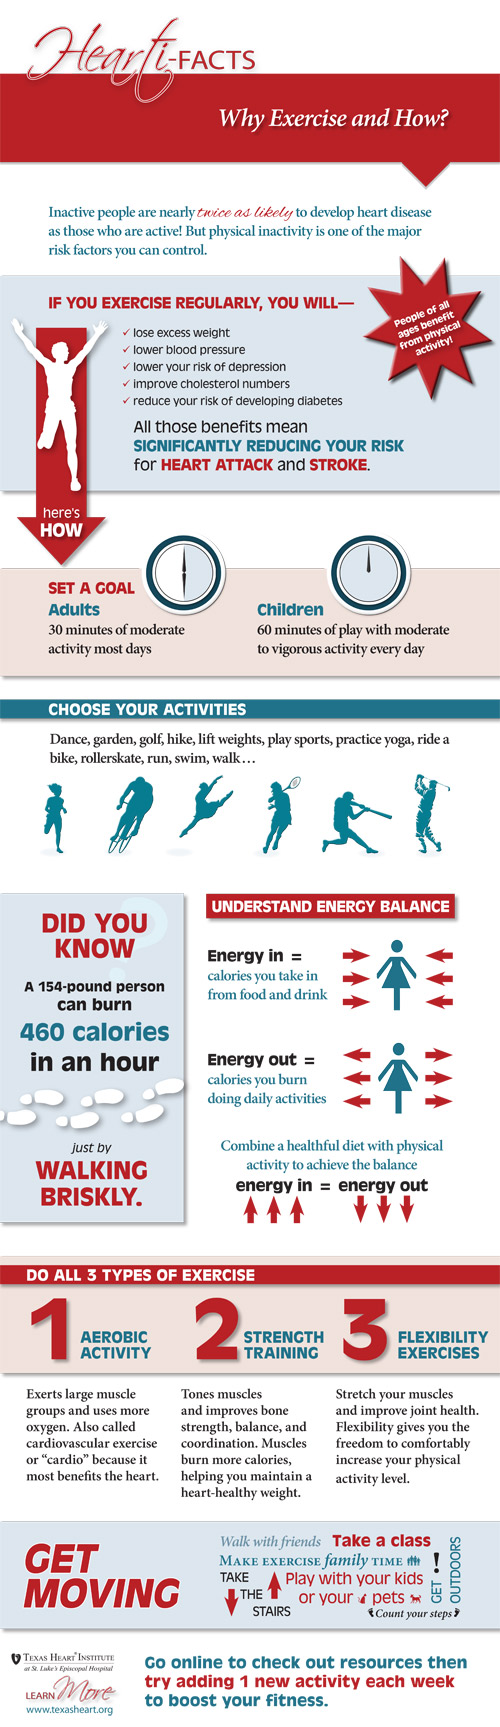 Why Exercise and How? Infographic